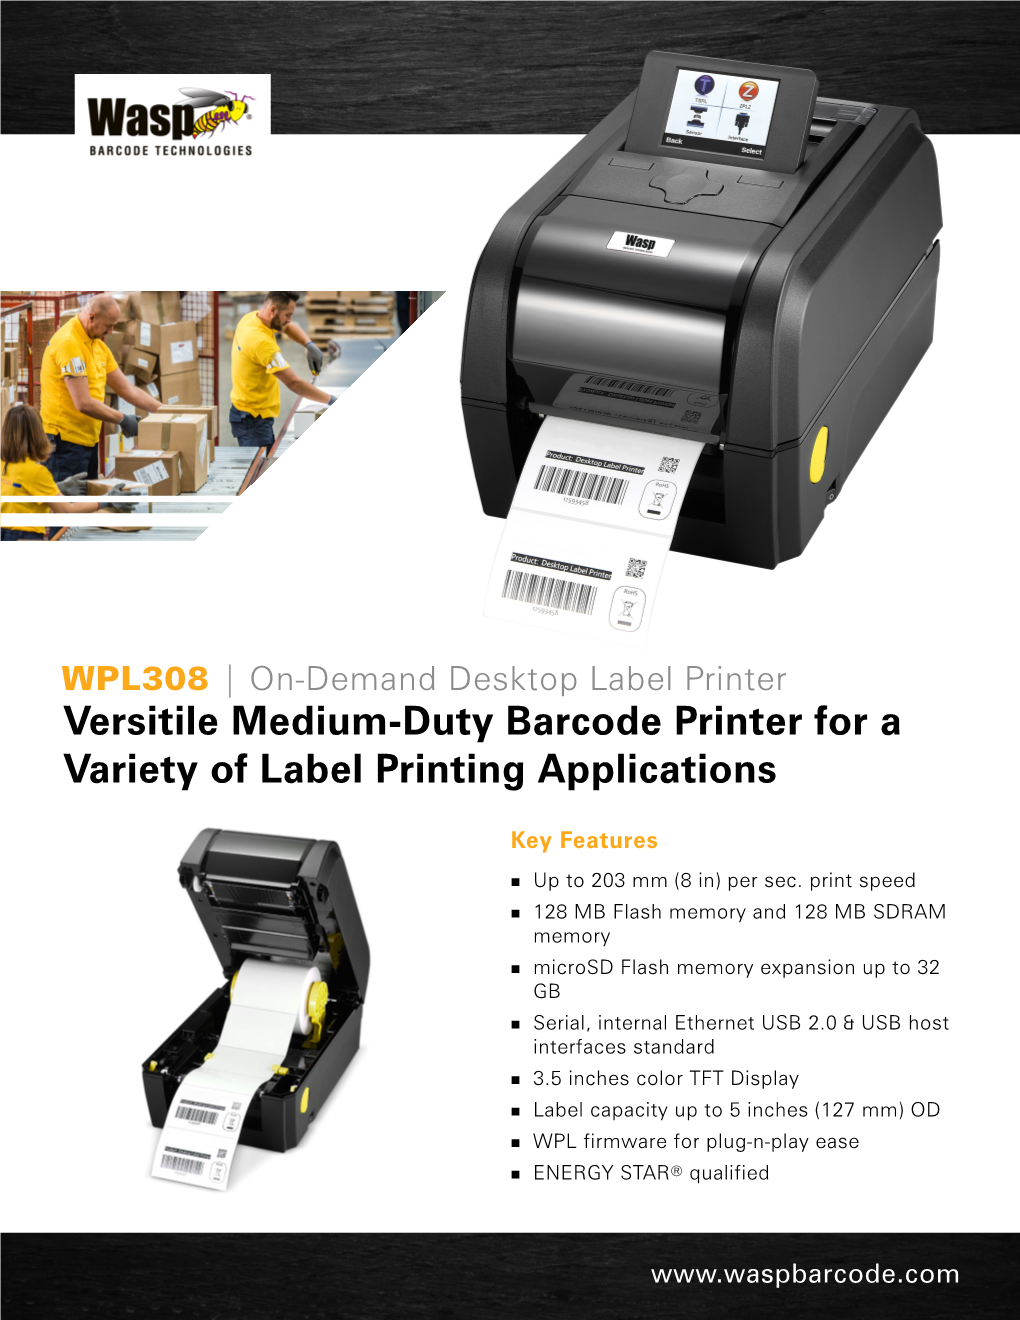 Versitile Medium-Duty Barcode Printer for a Variety of Label Printing Applications